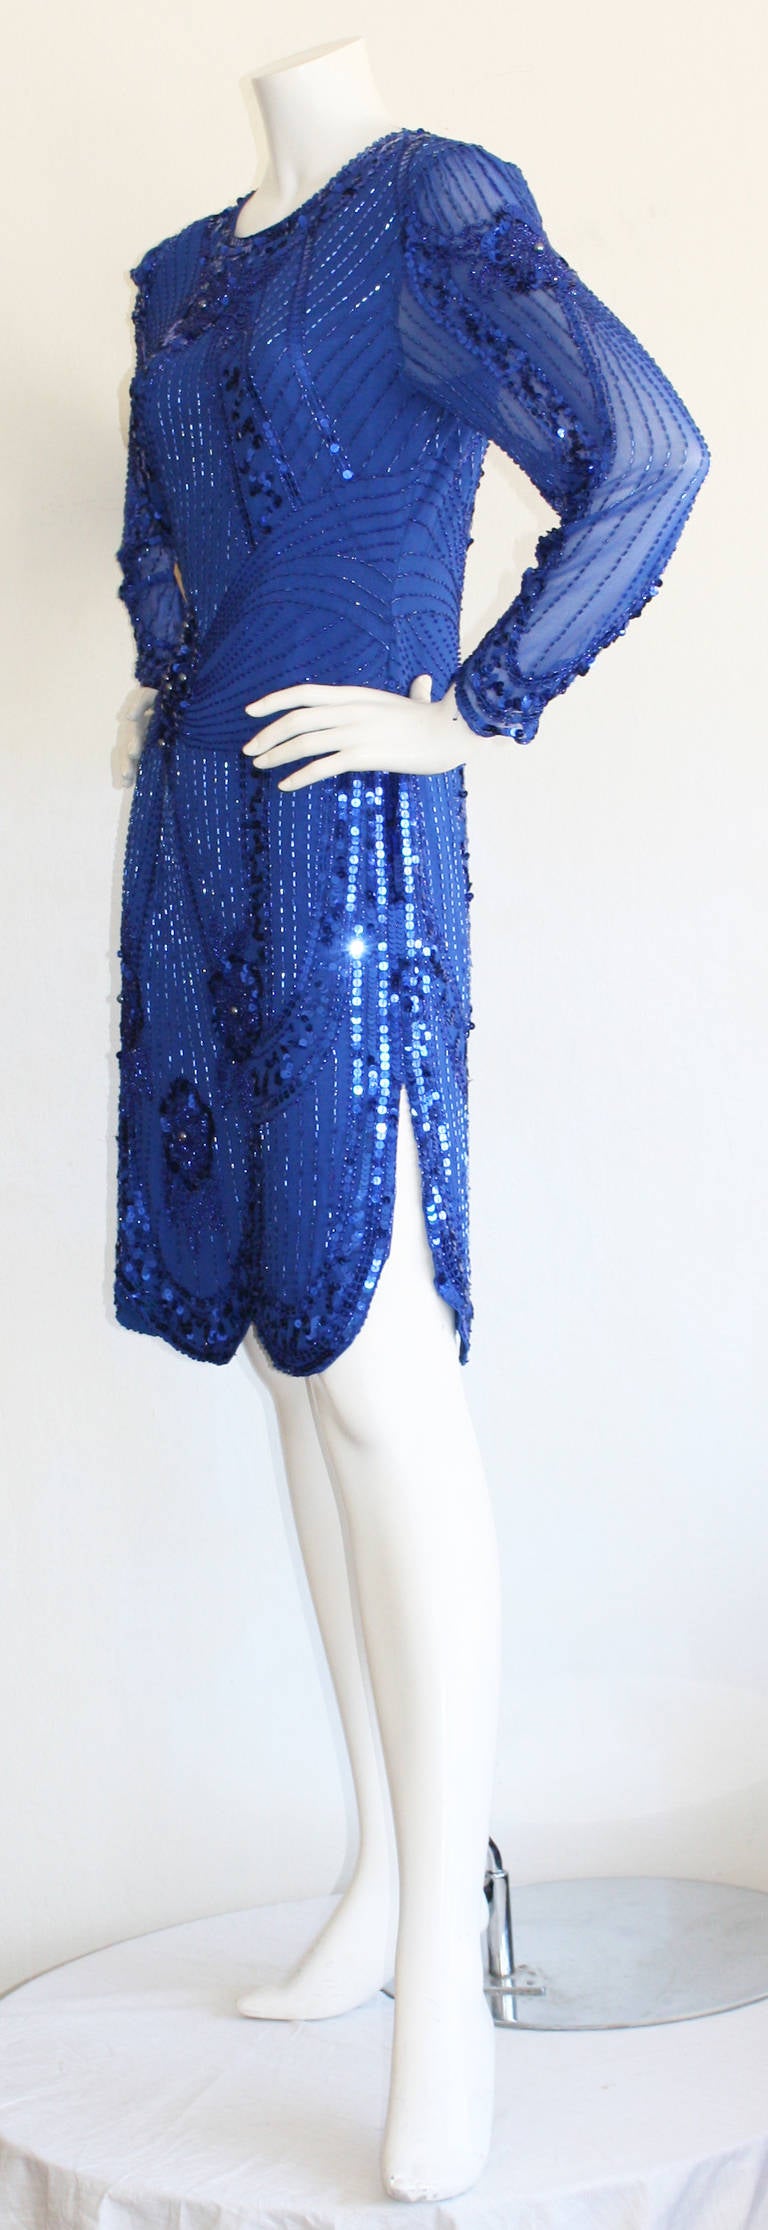 Gorgeous vintage Lanvin blue sequin/beaded 'Flapper' style dress! Scalloped hem, that reveals just the right amount of skin. Long sleeves. Dress features intricate craftsmanship throughout. All silk, and lined. In great condition. Approximately Size